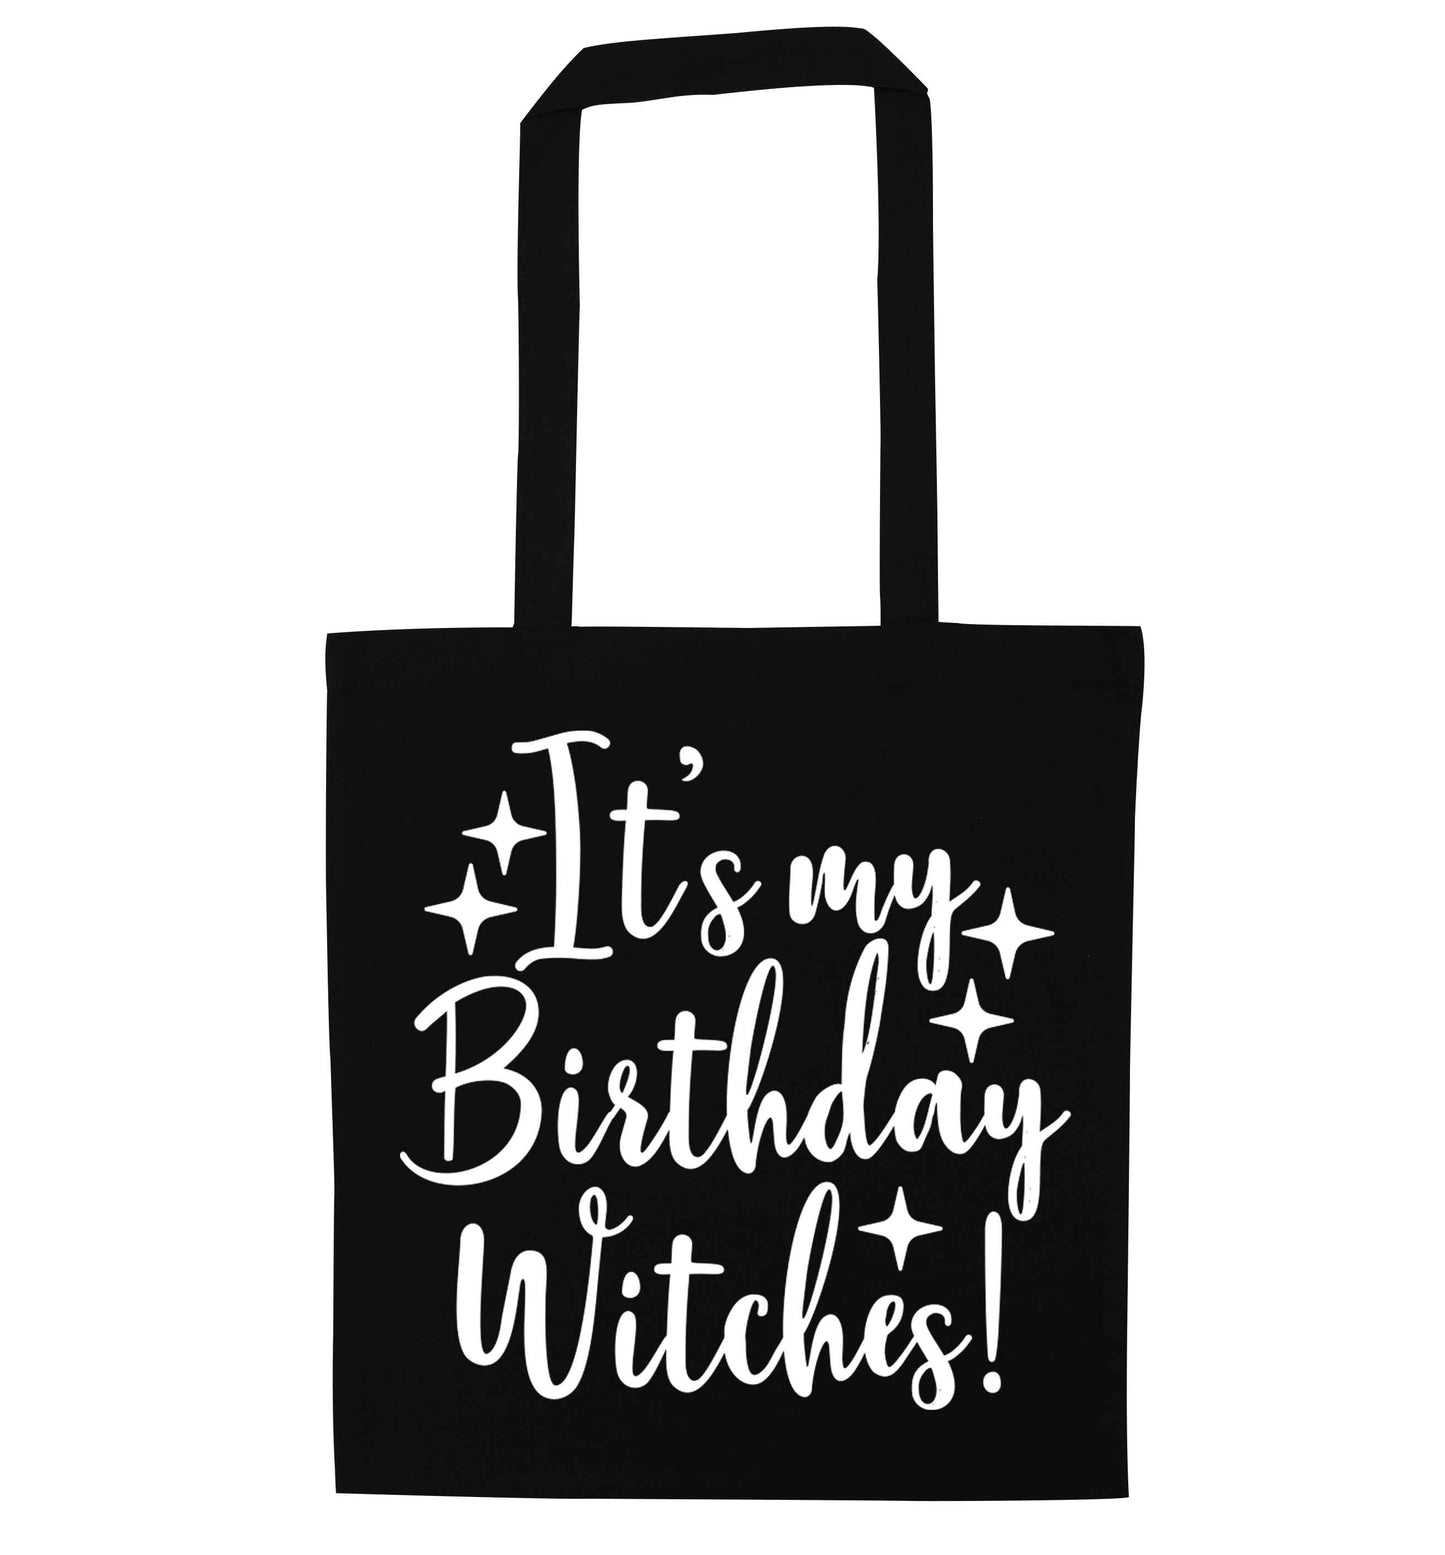 It's my birthday witches!black tote bag